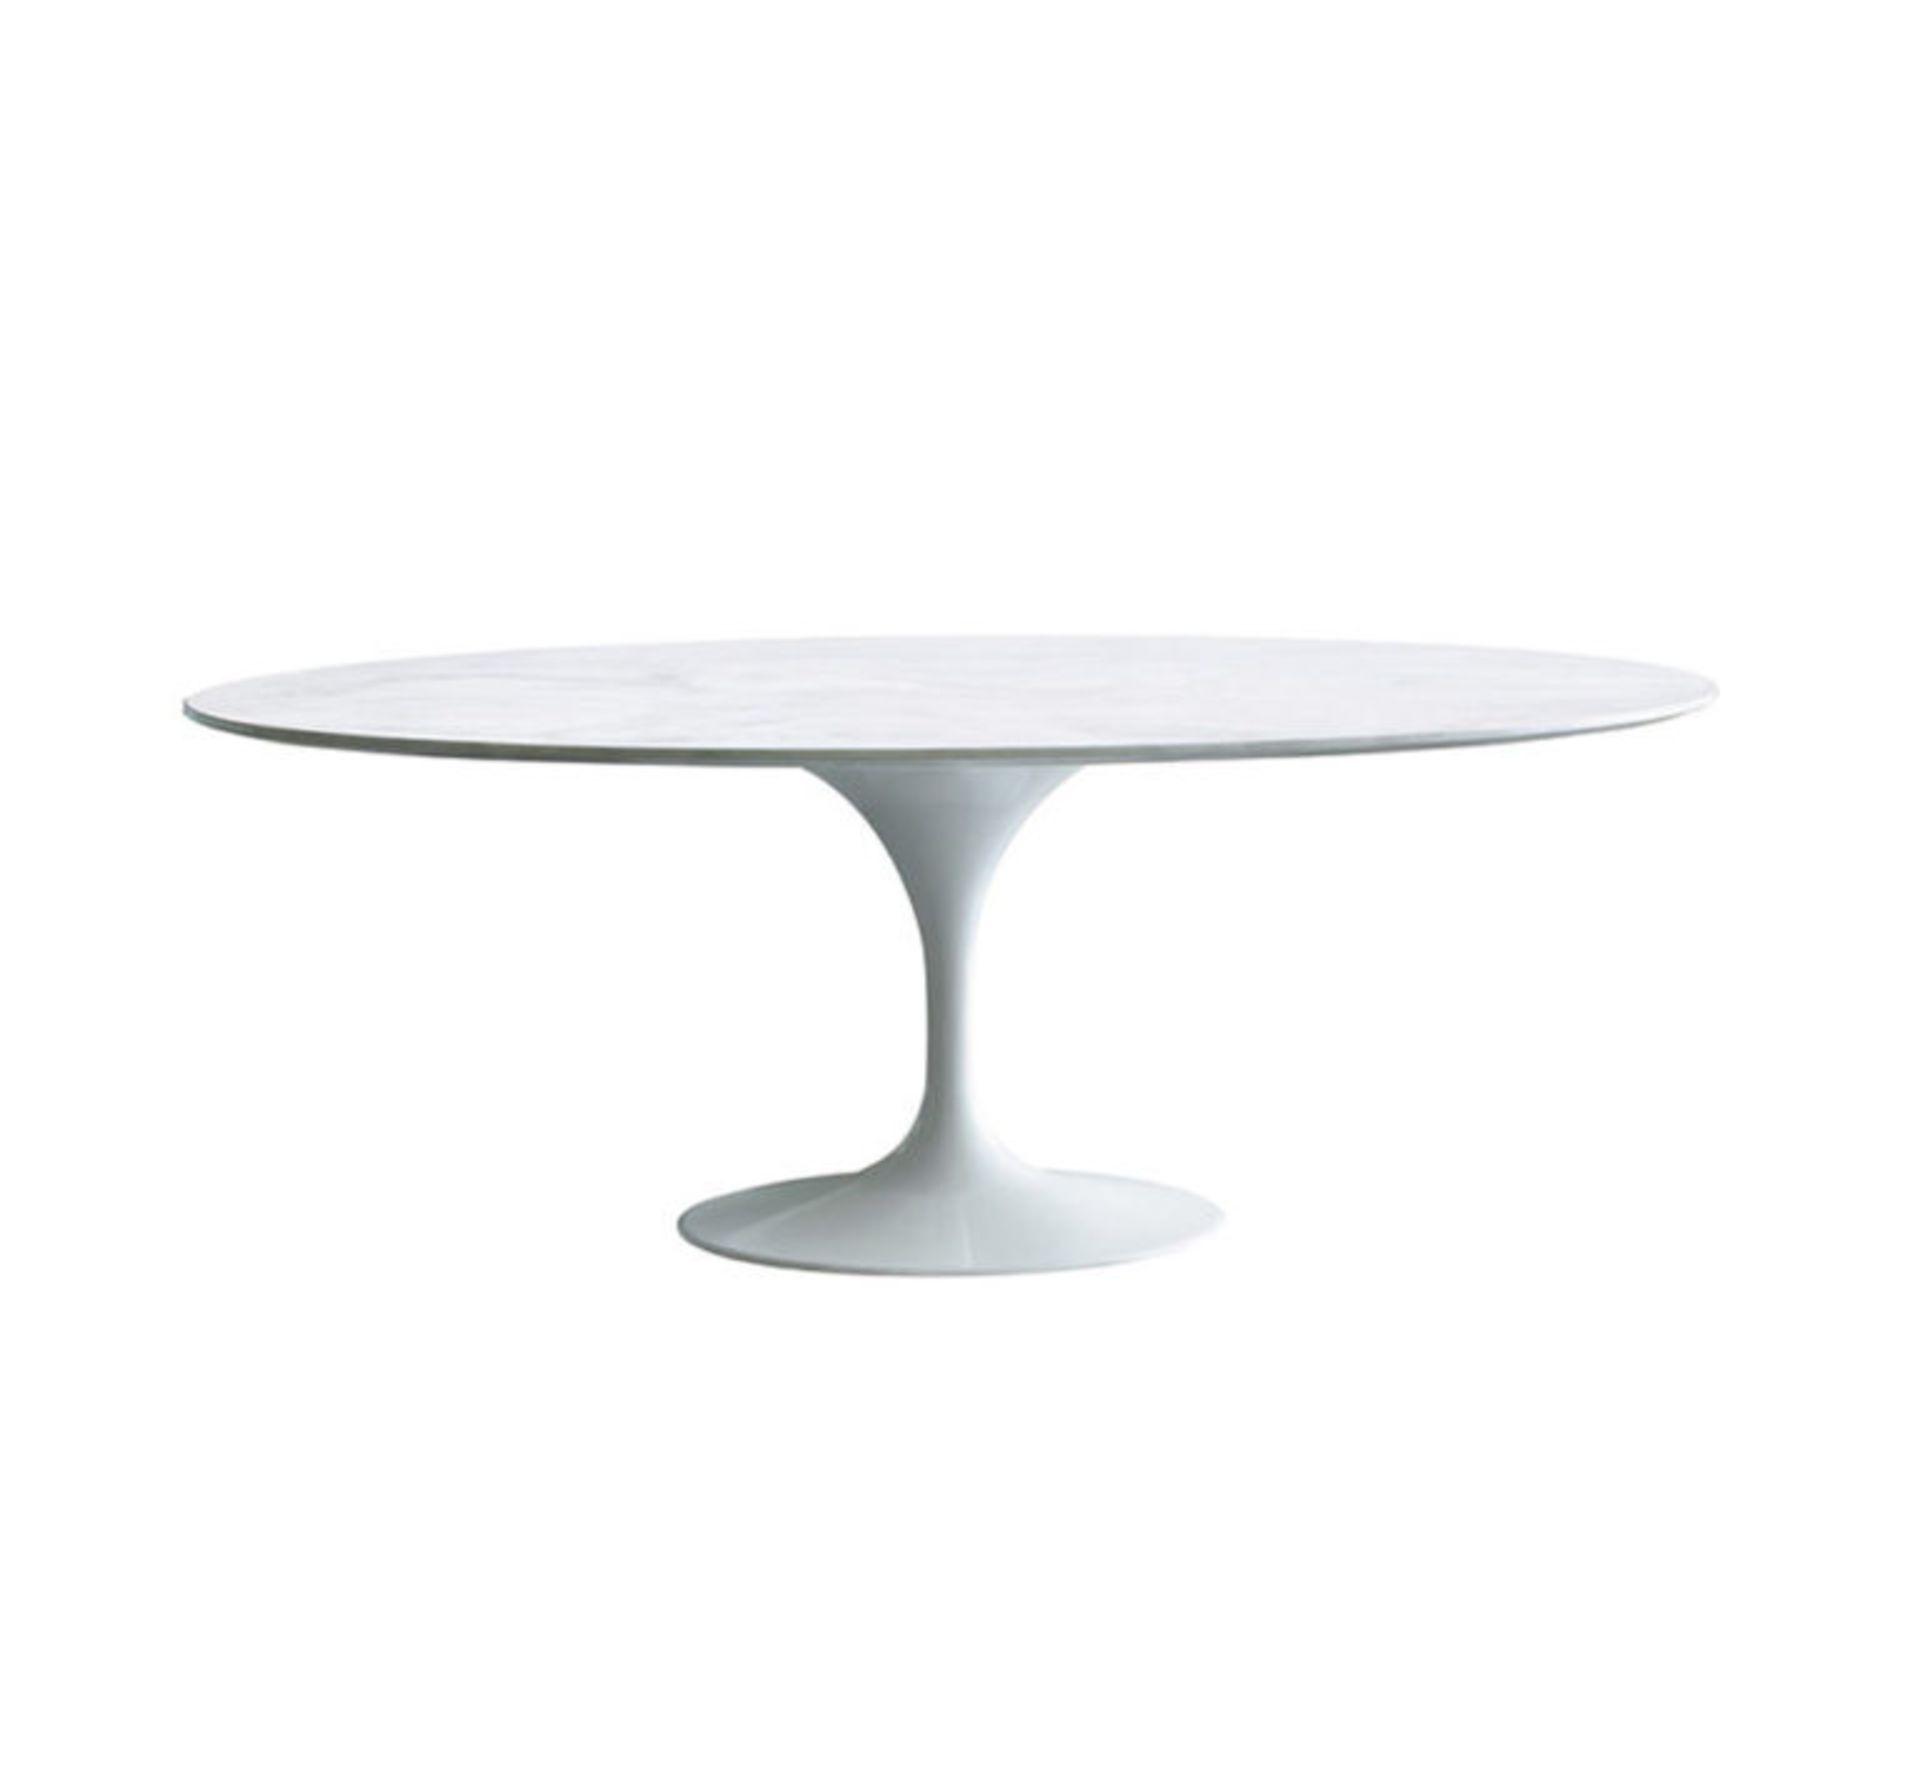 1 x Eero Saarinen Inspired Carrara Marble Tulip Dining Table - 1950's Reproduction Oval Dining Table - Image 5 of 5